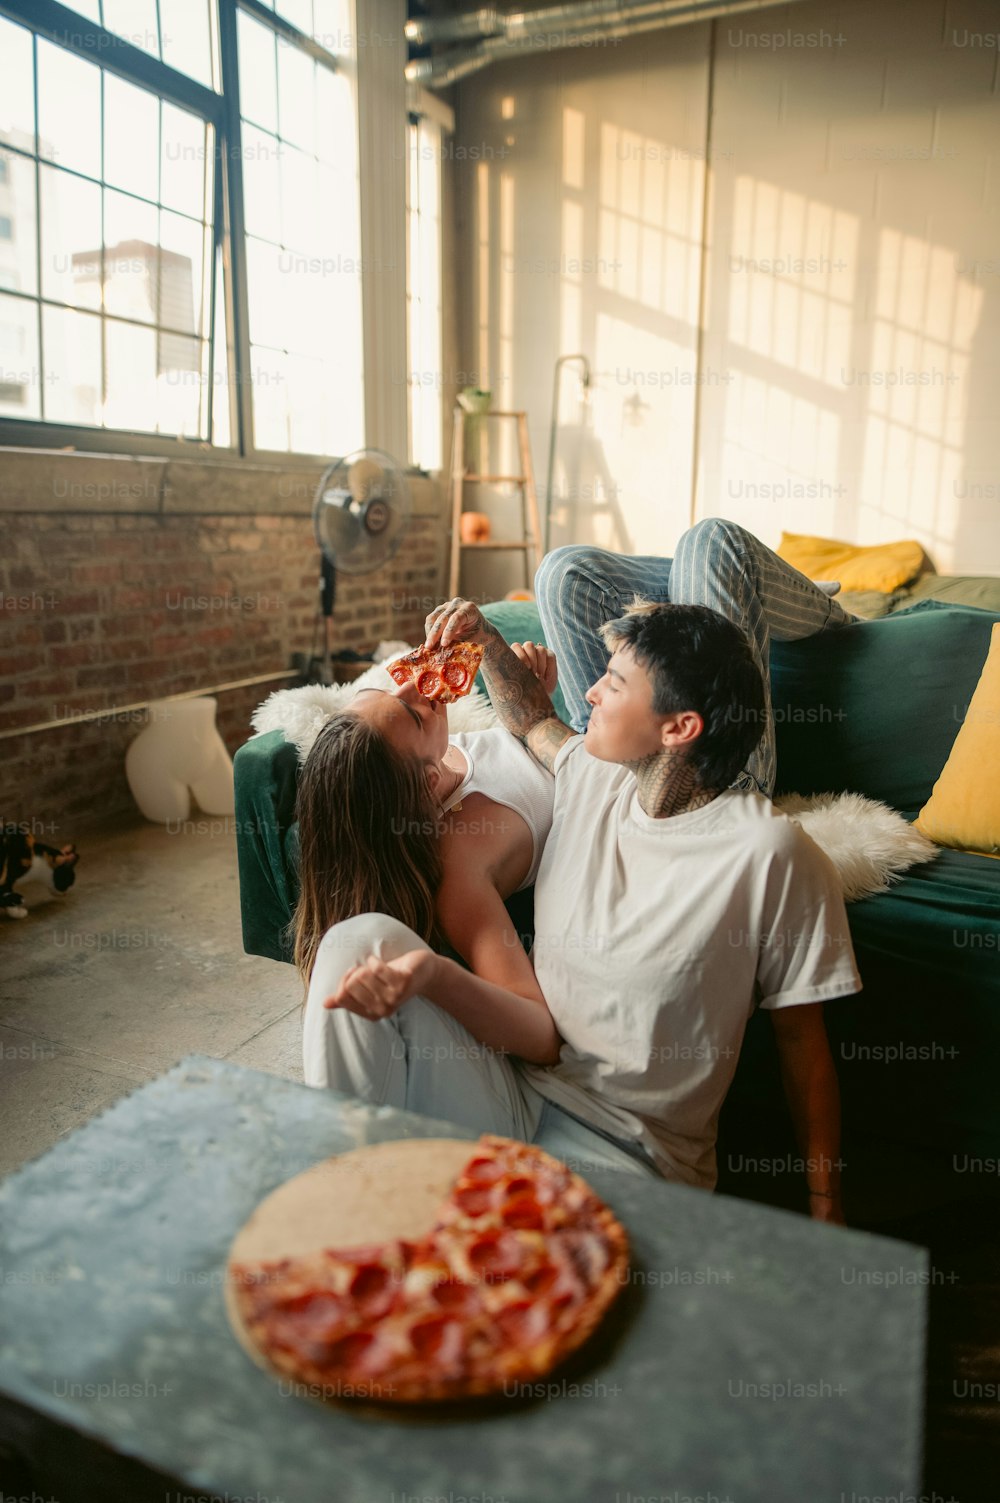 a man and woman sitting on a couch next to a pizza